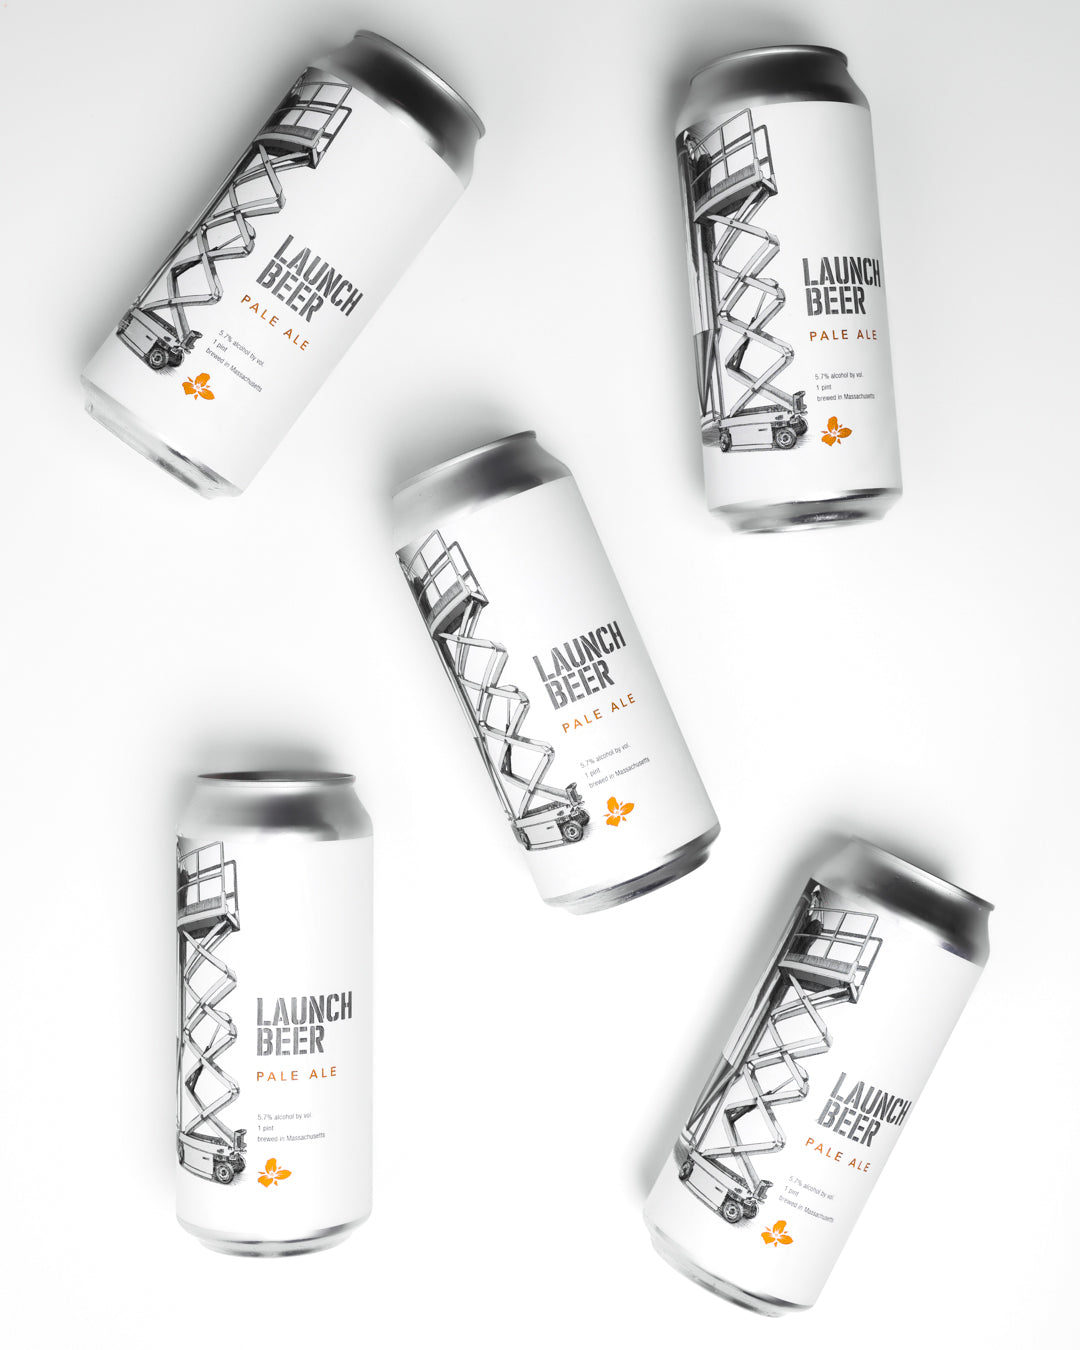 Launch Beer 4pk Cans